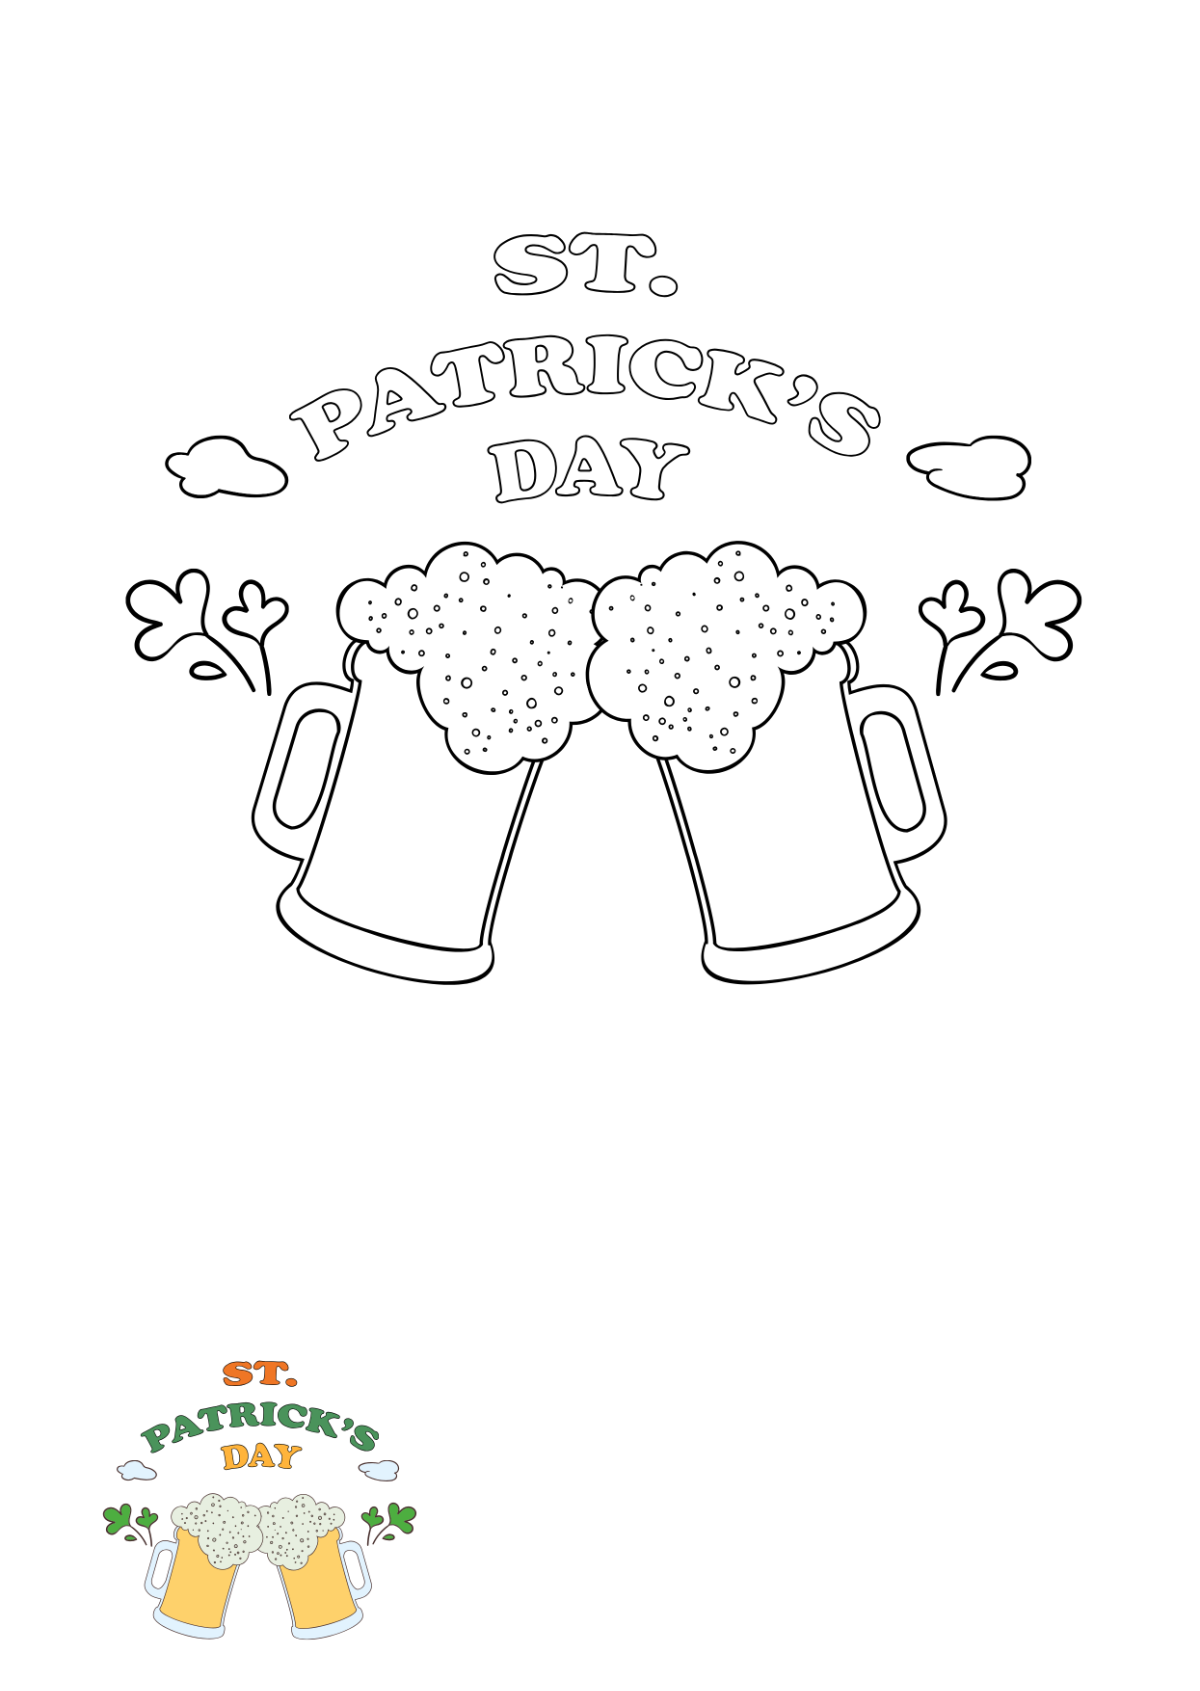 Simple St. Patrick’s Day Coloring Page Template